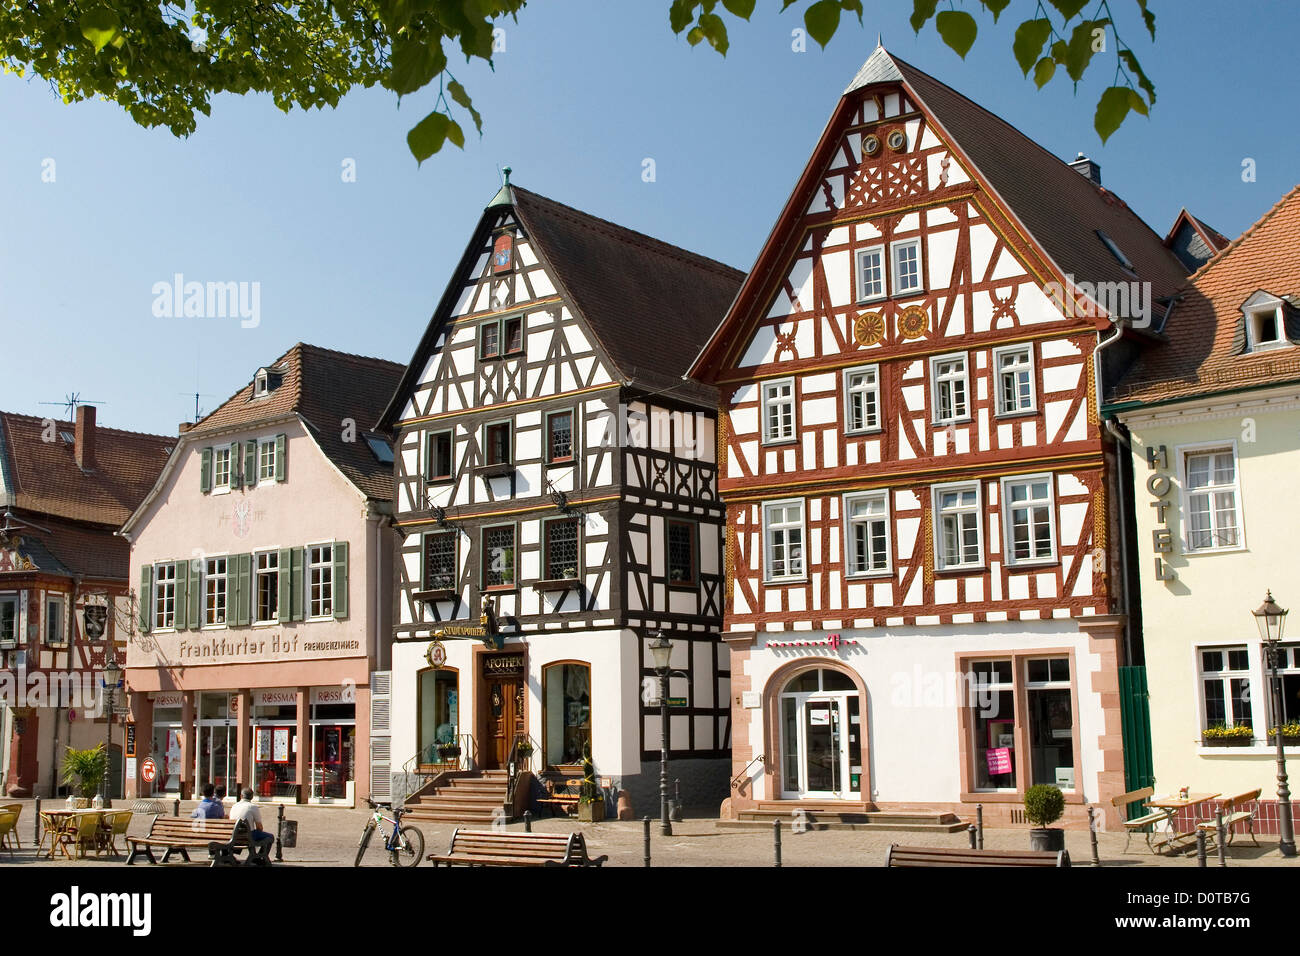 Places of interest, place of interest, Seligenstadt, marketplace, framework, half-timbered house, half-timbered houses, conserva Stock Photo